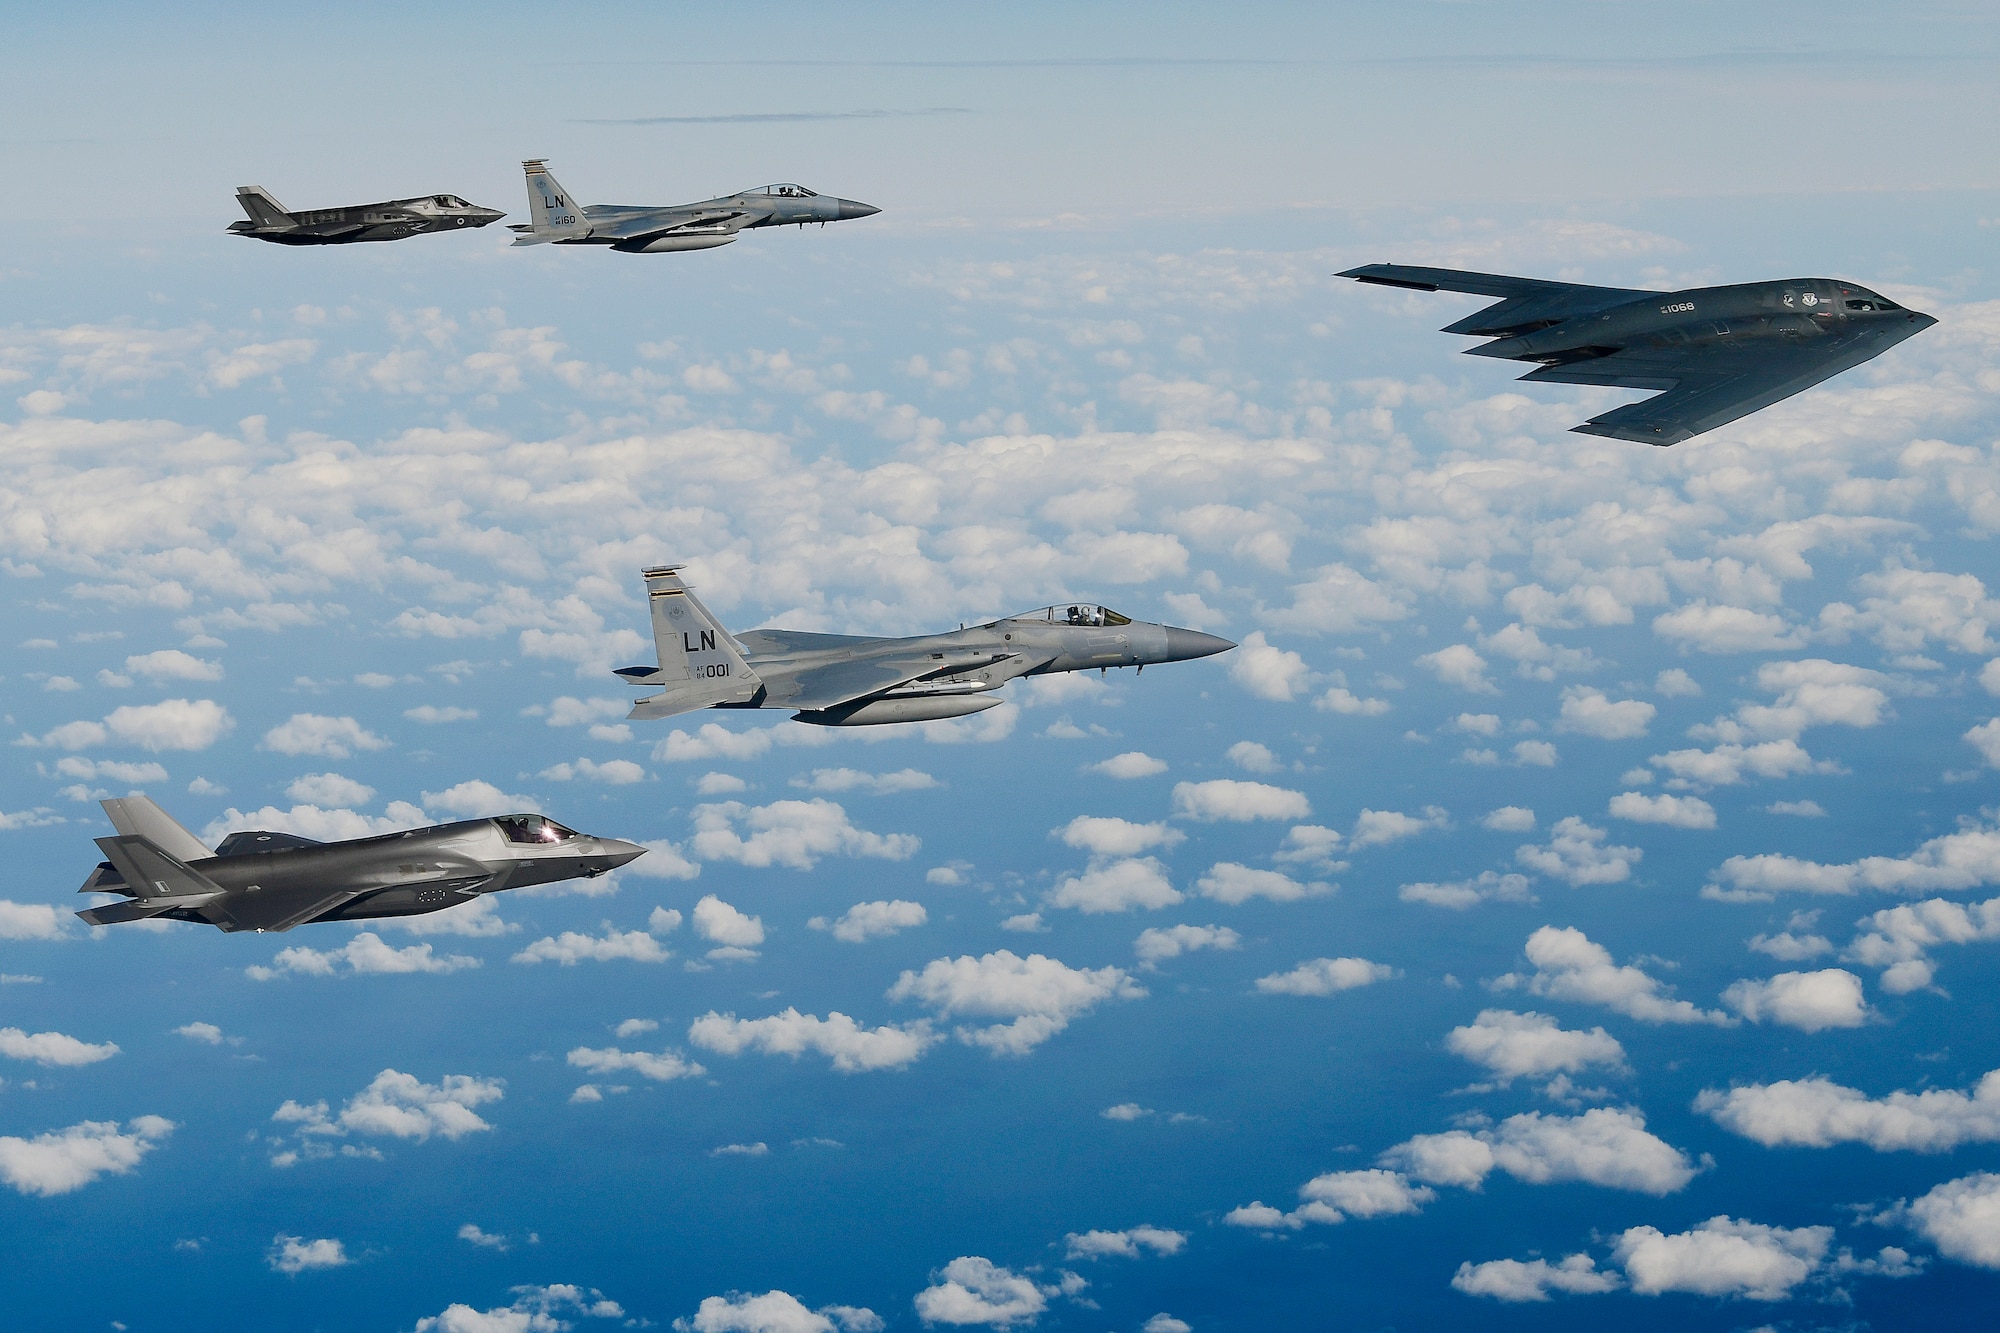 A B-2A Spirit bomber assigned to the 509th Bomb Wing leads a delta formation consisting of two F-15C Eagles assigned to the 48th Fighter Wing and two Royal Air Force F-35B Lightning IIs as they conduct aerial operations over the North Sea, Sept. 16, 2019. The 48th Fighter Wing and the Royal Air Force routinely train with integrated fourth and fifth-generation capabilities to deliver full spectrum air combat support to European allies and partners. (U.S. Air Force photo by Tech. Sgt. Matthew Plew)